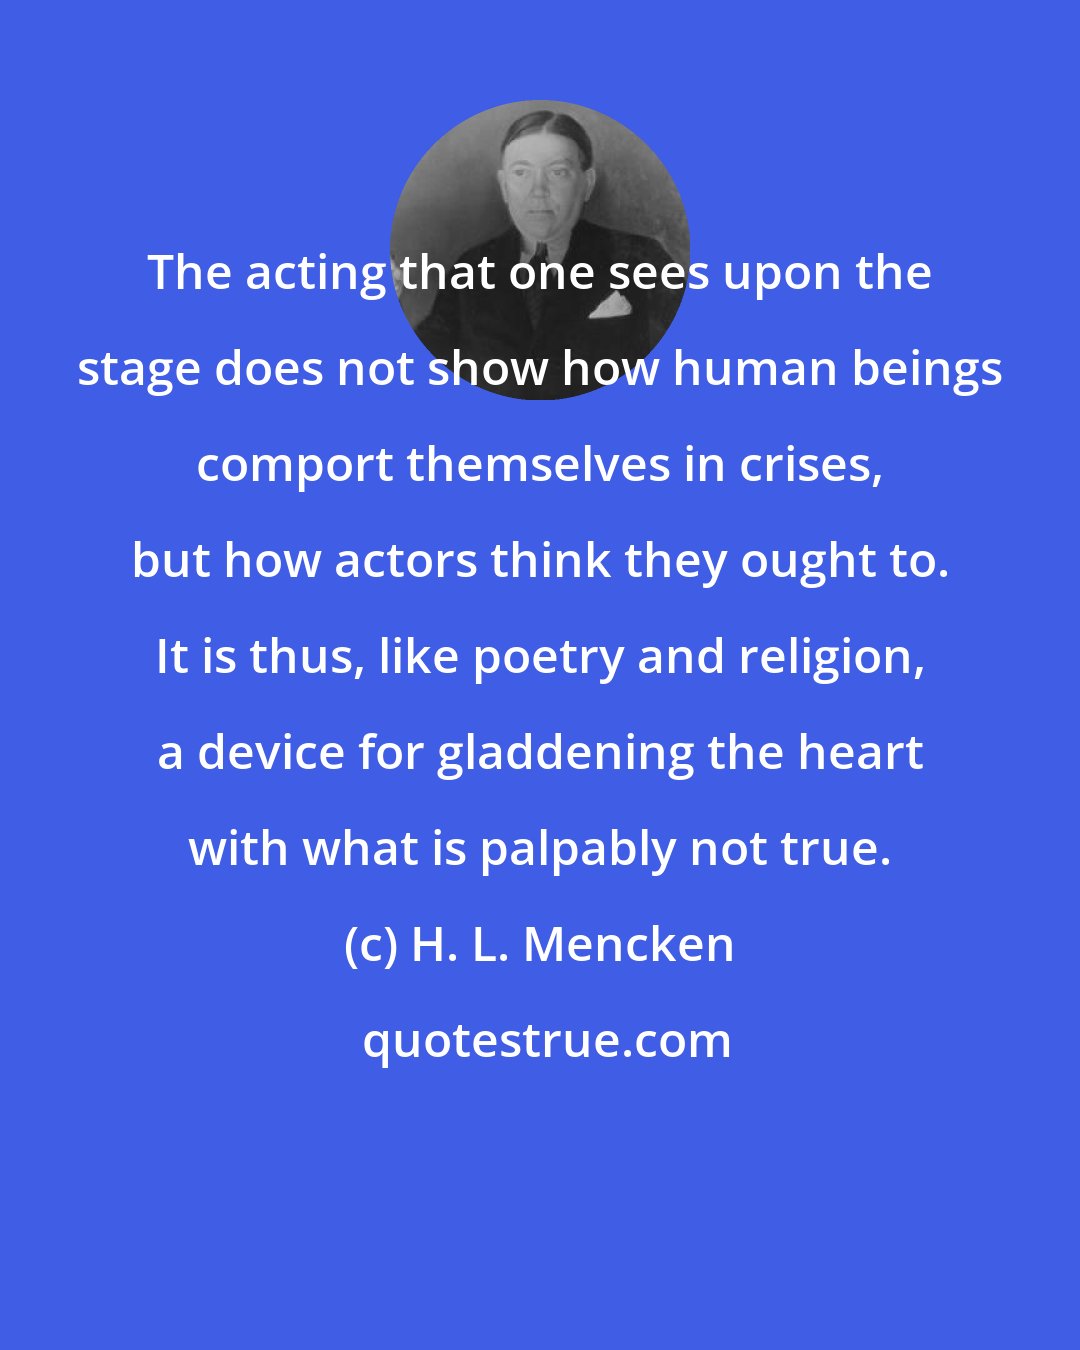 H. L. Mencken: The acting that one sees upon the stage does not show how human beings comport themselves in crises, but how actors think they ought to. It is thus, like poetry and religion, a device for gladdening the heart with what is palpably not true.